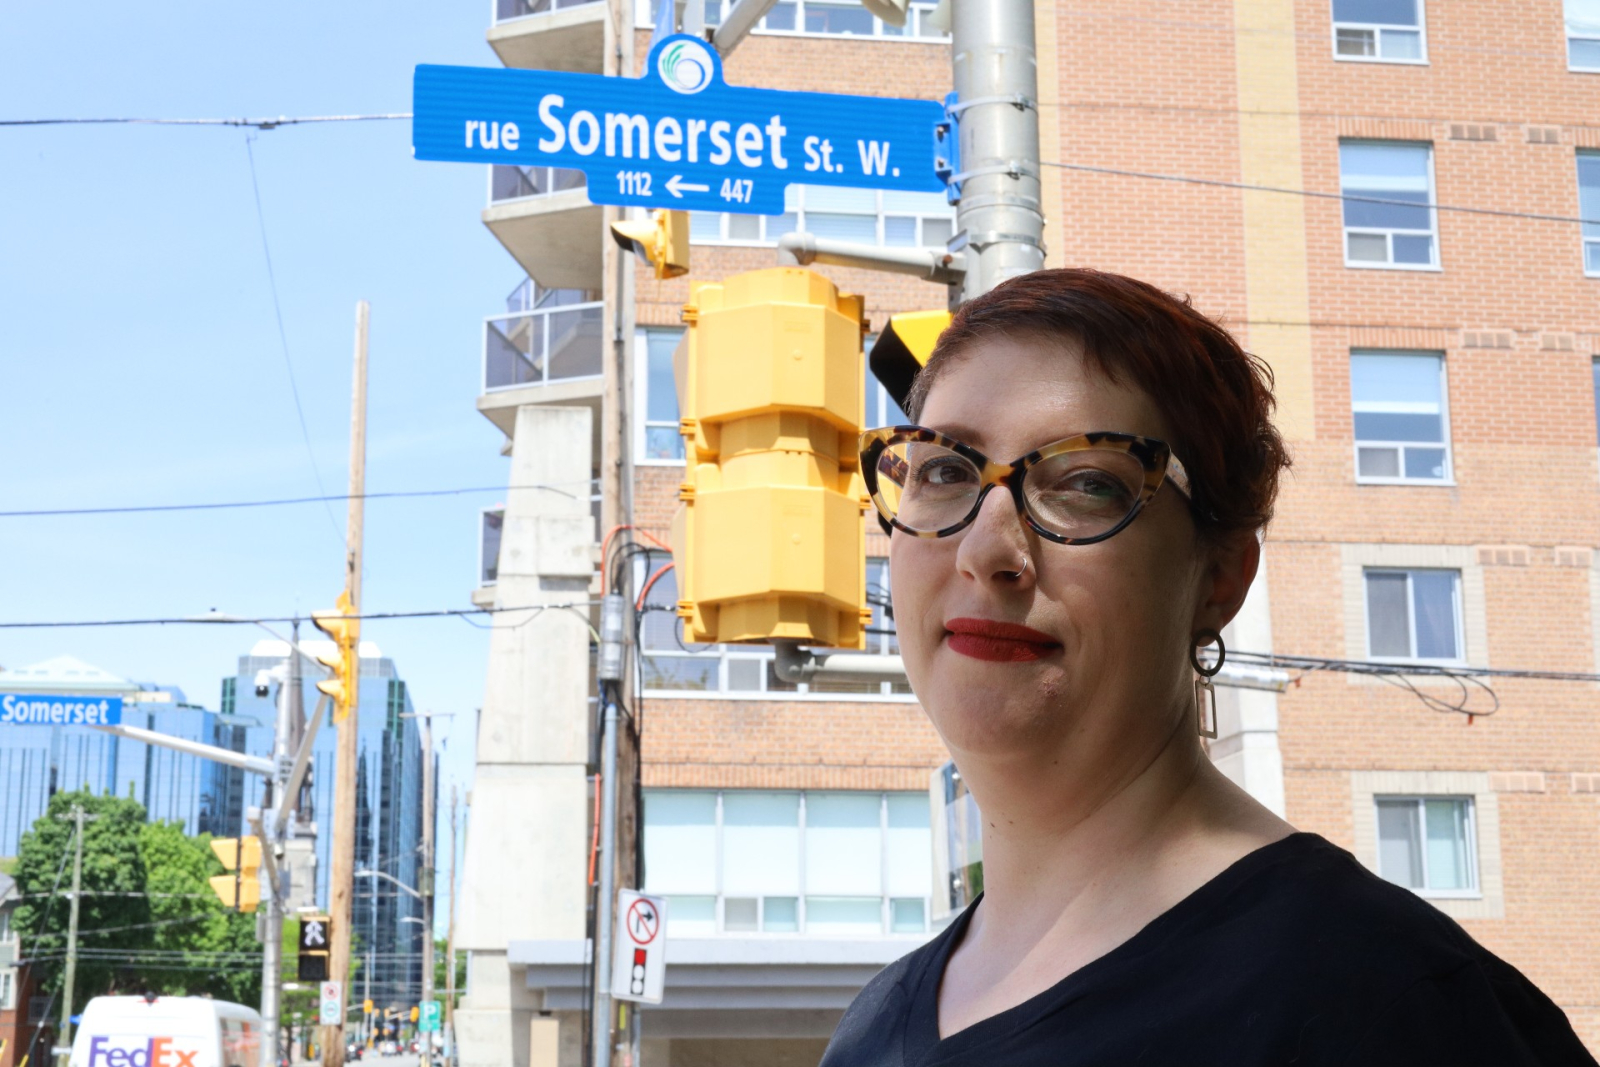 Headshot of a woman standing with a street sign that says 